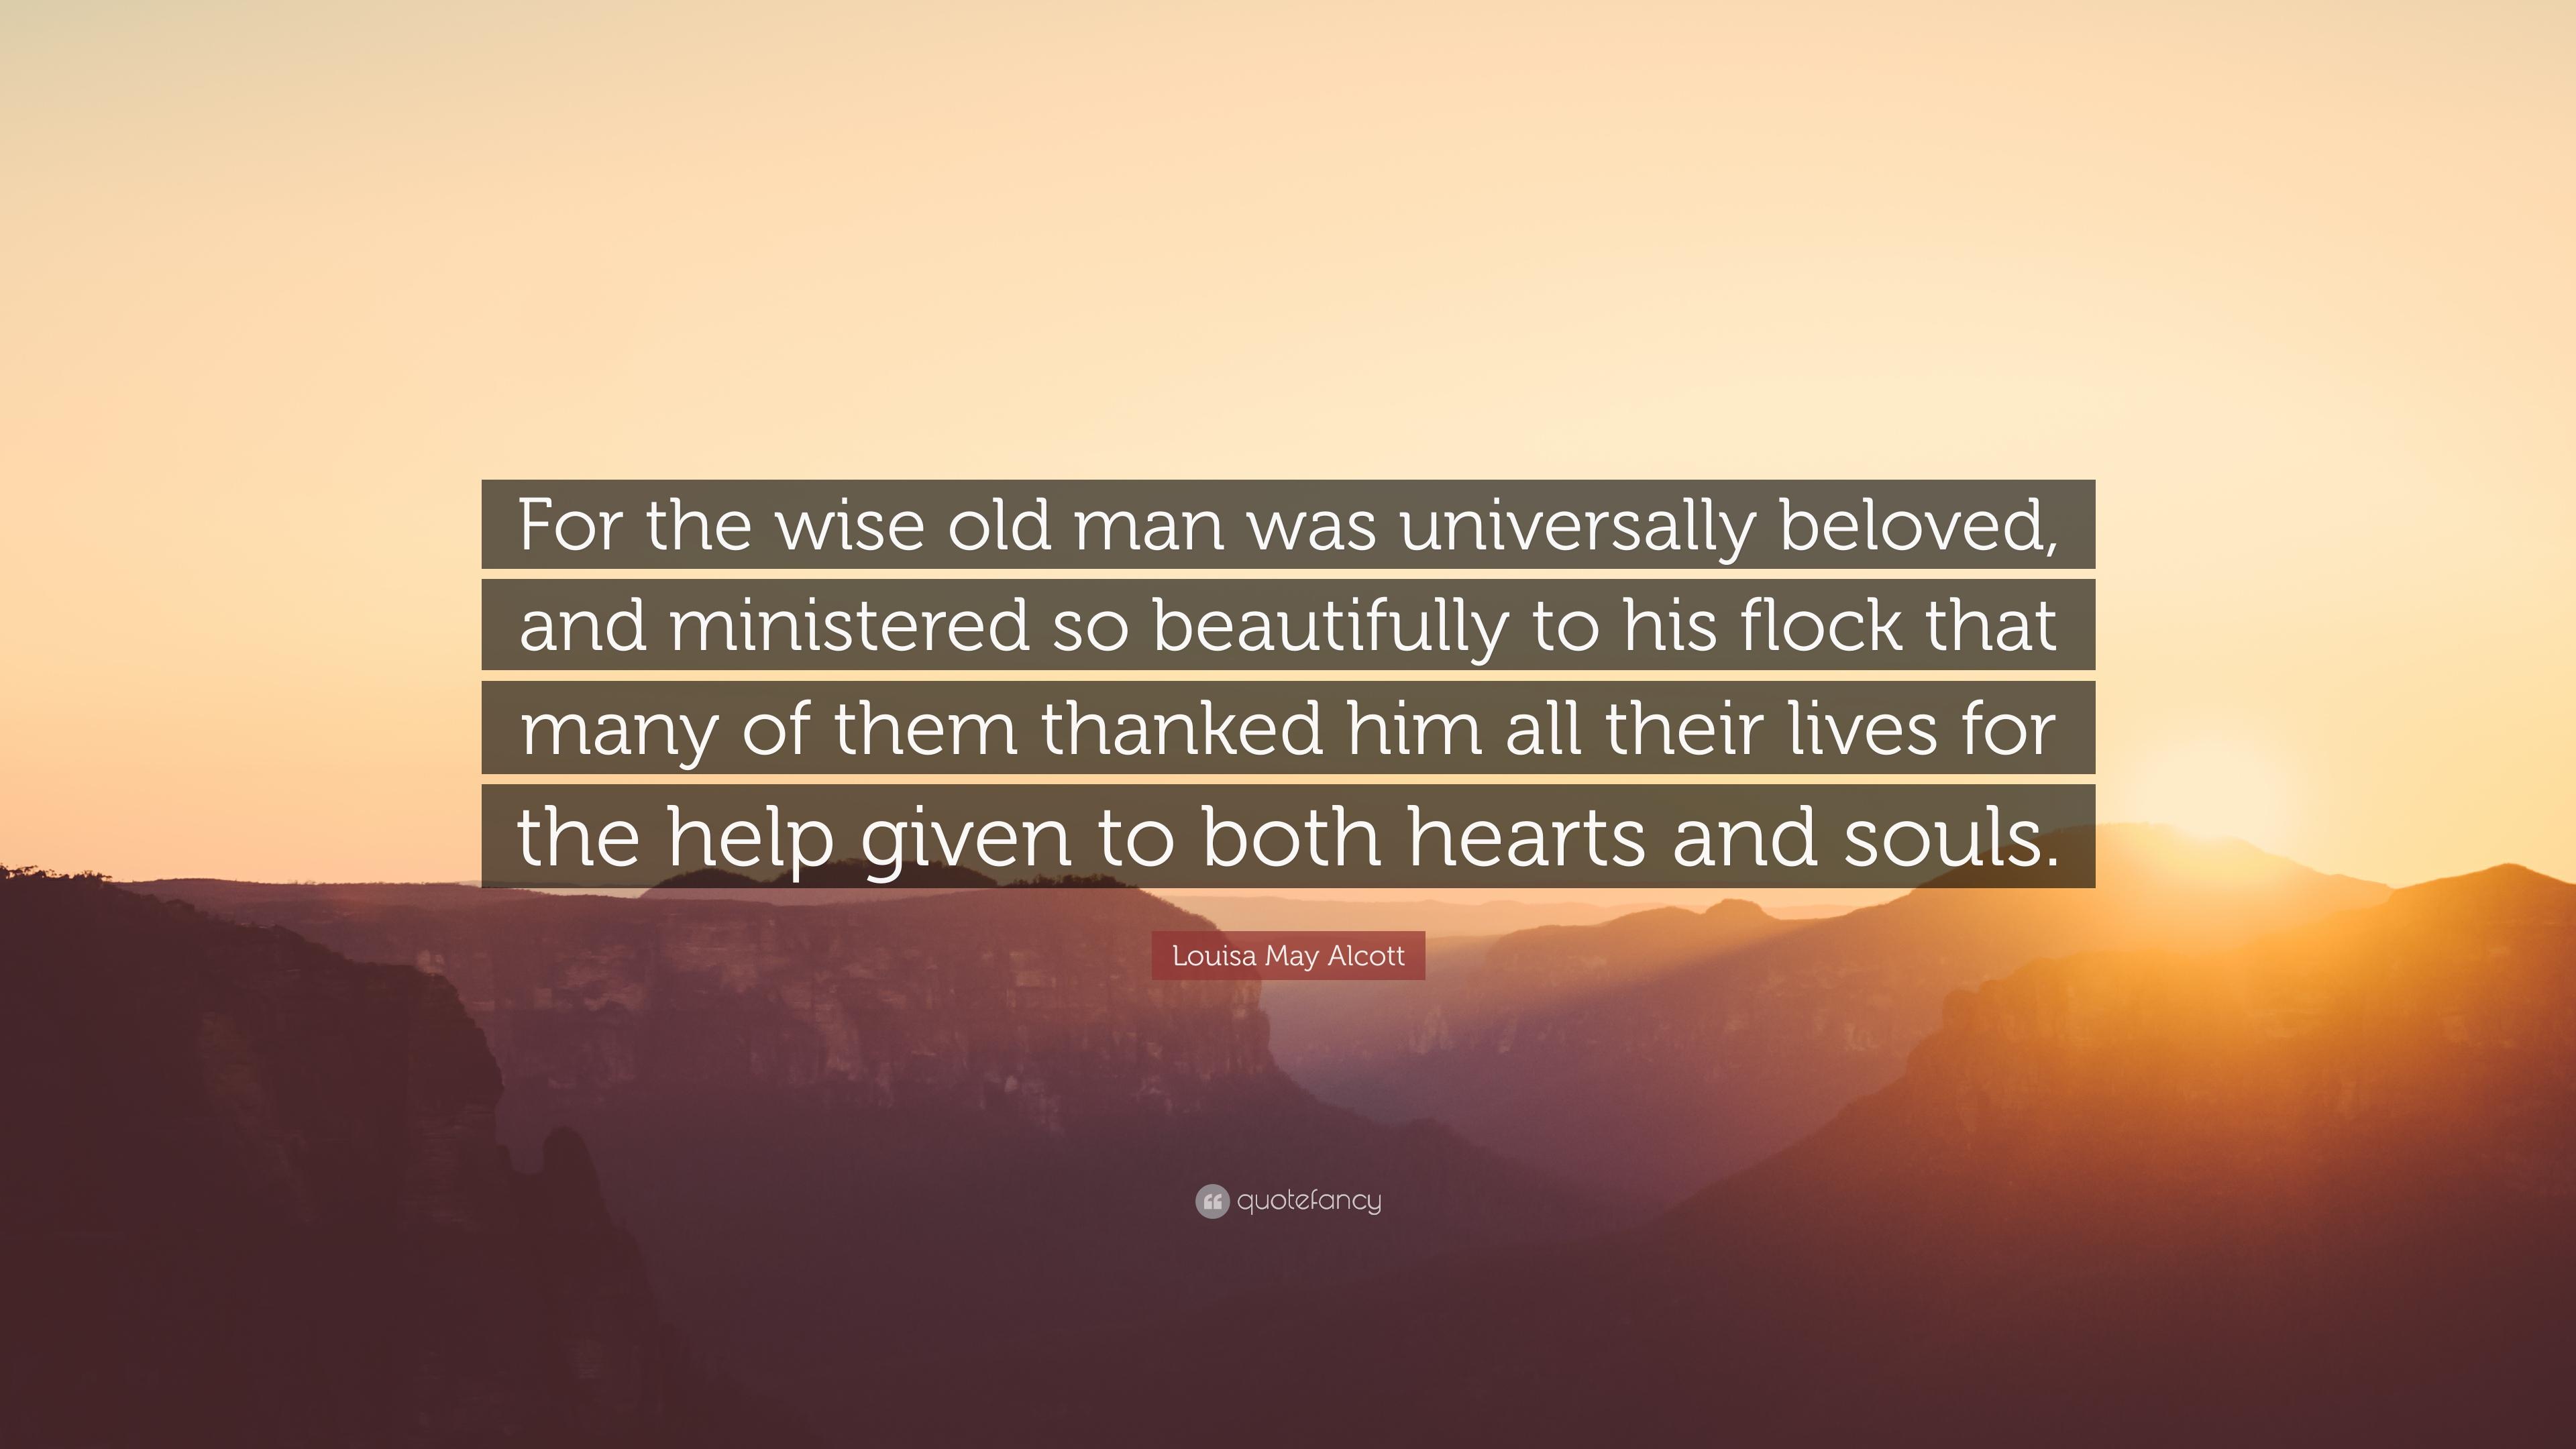 Louisa May Alcott Quote: “For the wise old man was universally